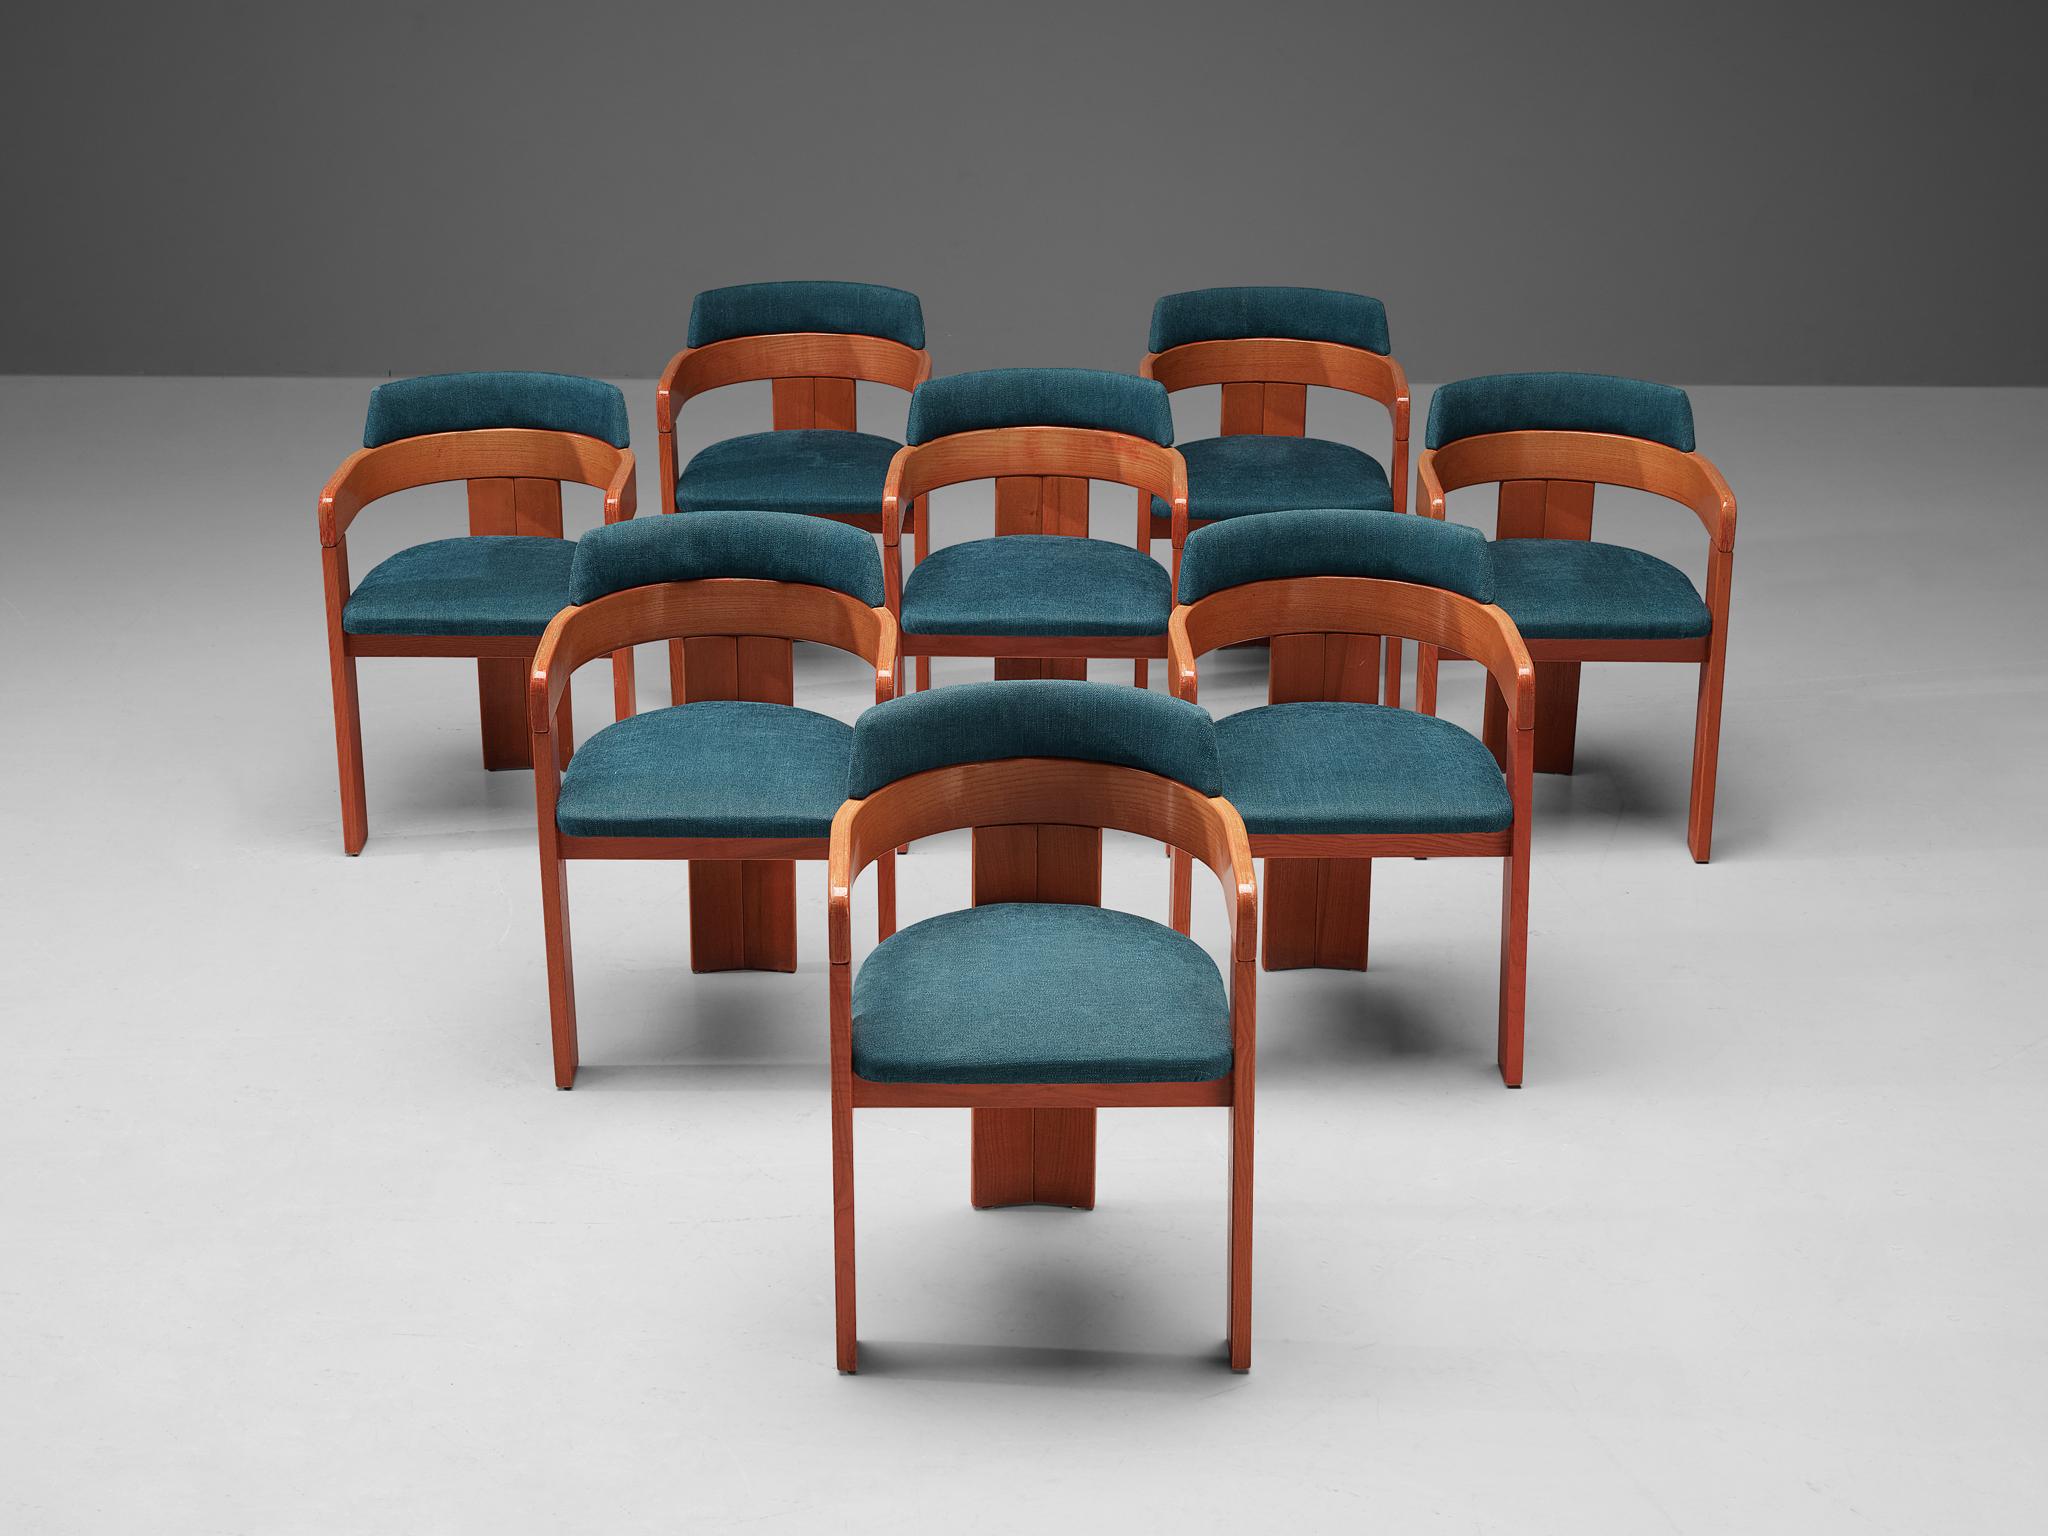 Set of eight dining chairs, ash, fabric, Italy, 1970s

This Italian dining chair has a strong resemblance to Augusto Savini's 'Pamplona' chair (1965) and Afra & Tobia Scrapa's 'Pigreco' chair (1959/60), yet the designs are different in their